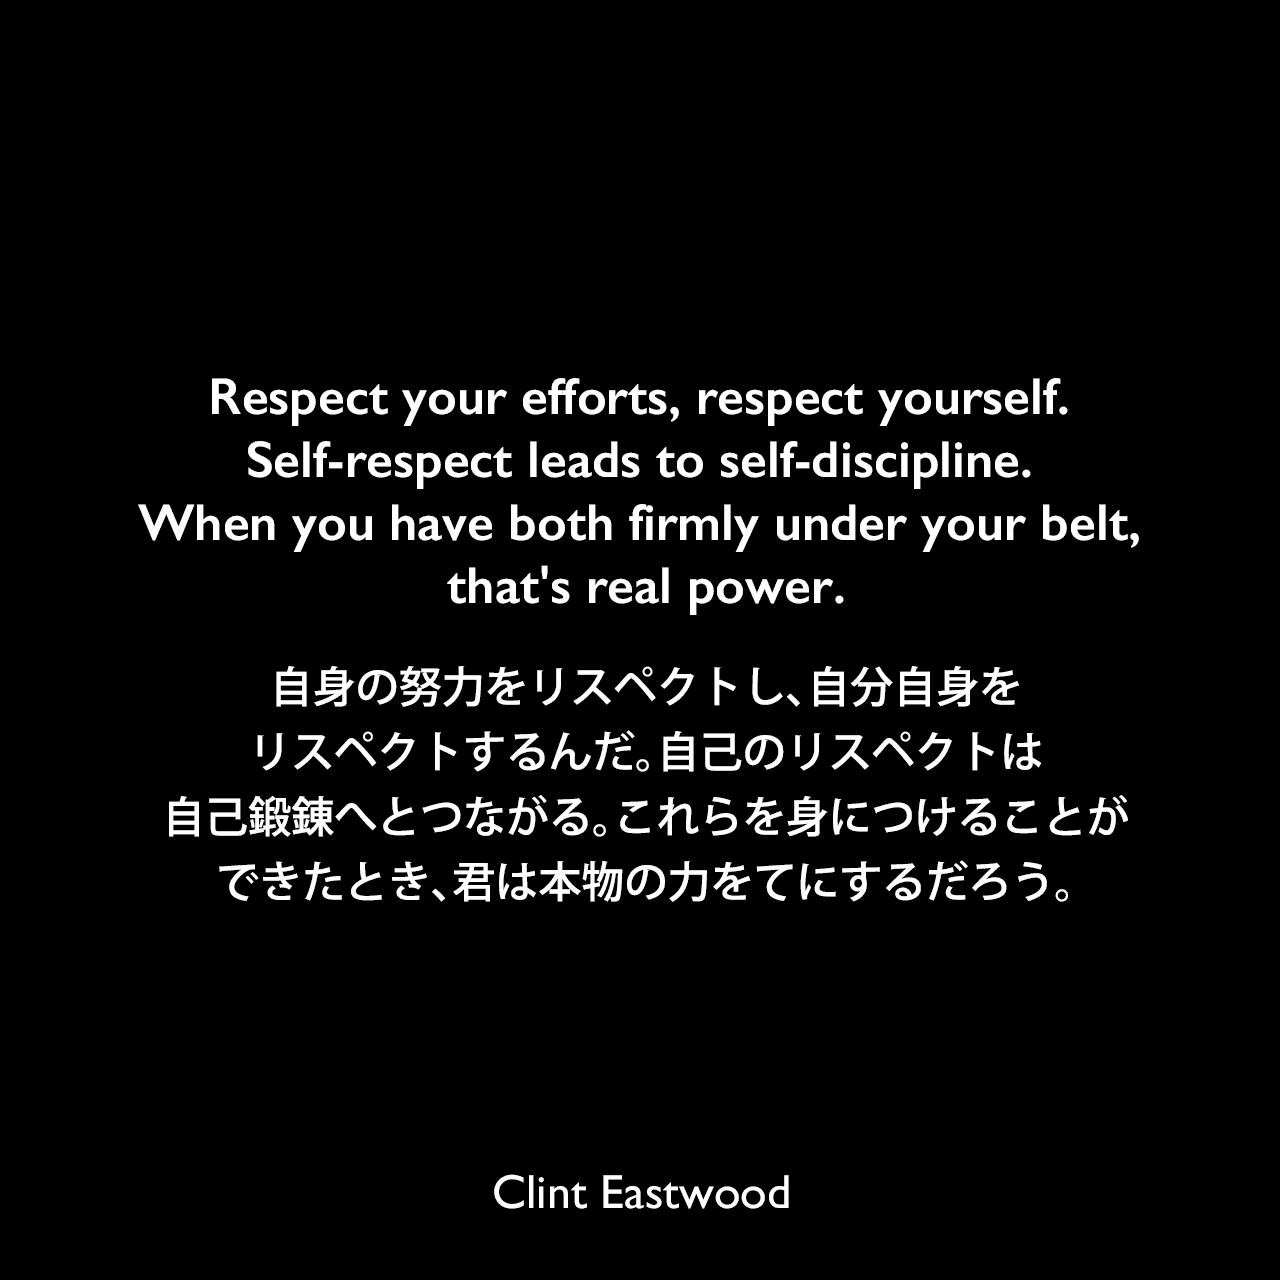 Respect your efforts, respect yourself. Self-respect leads to self-discipline. When you have both firmly under your belt, that’s real power.自身の努力をリスペクトし、自分自身をリスペクトするんだ。自己のリスペクトは自己鍛錬へとつながる。これらを身につけることができたとき、君は本物の力をてにするだろう。